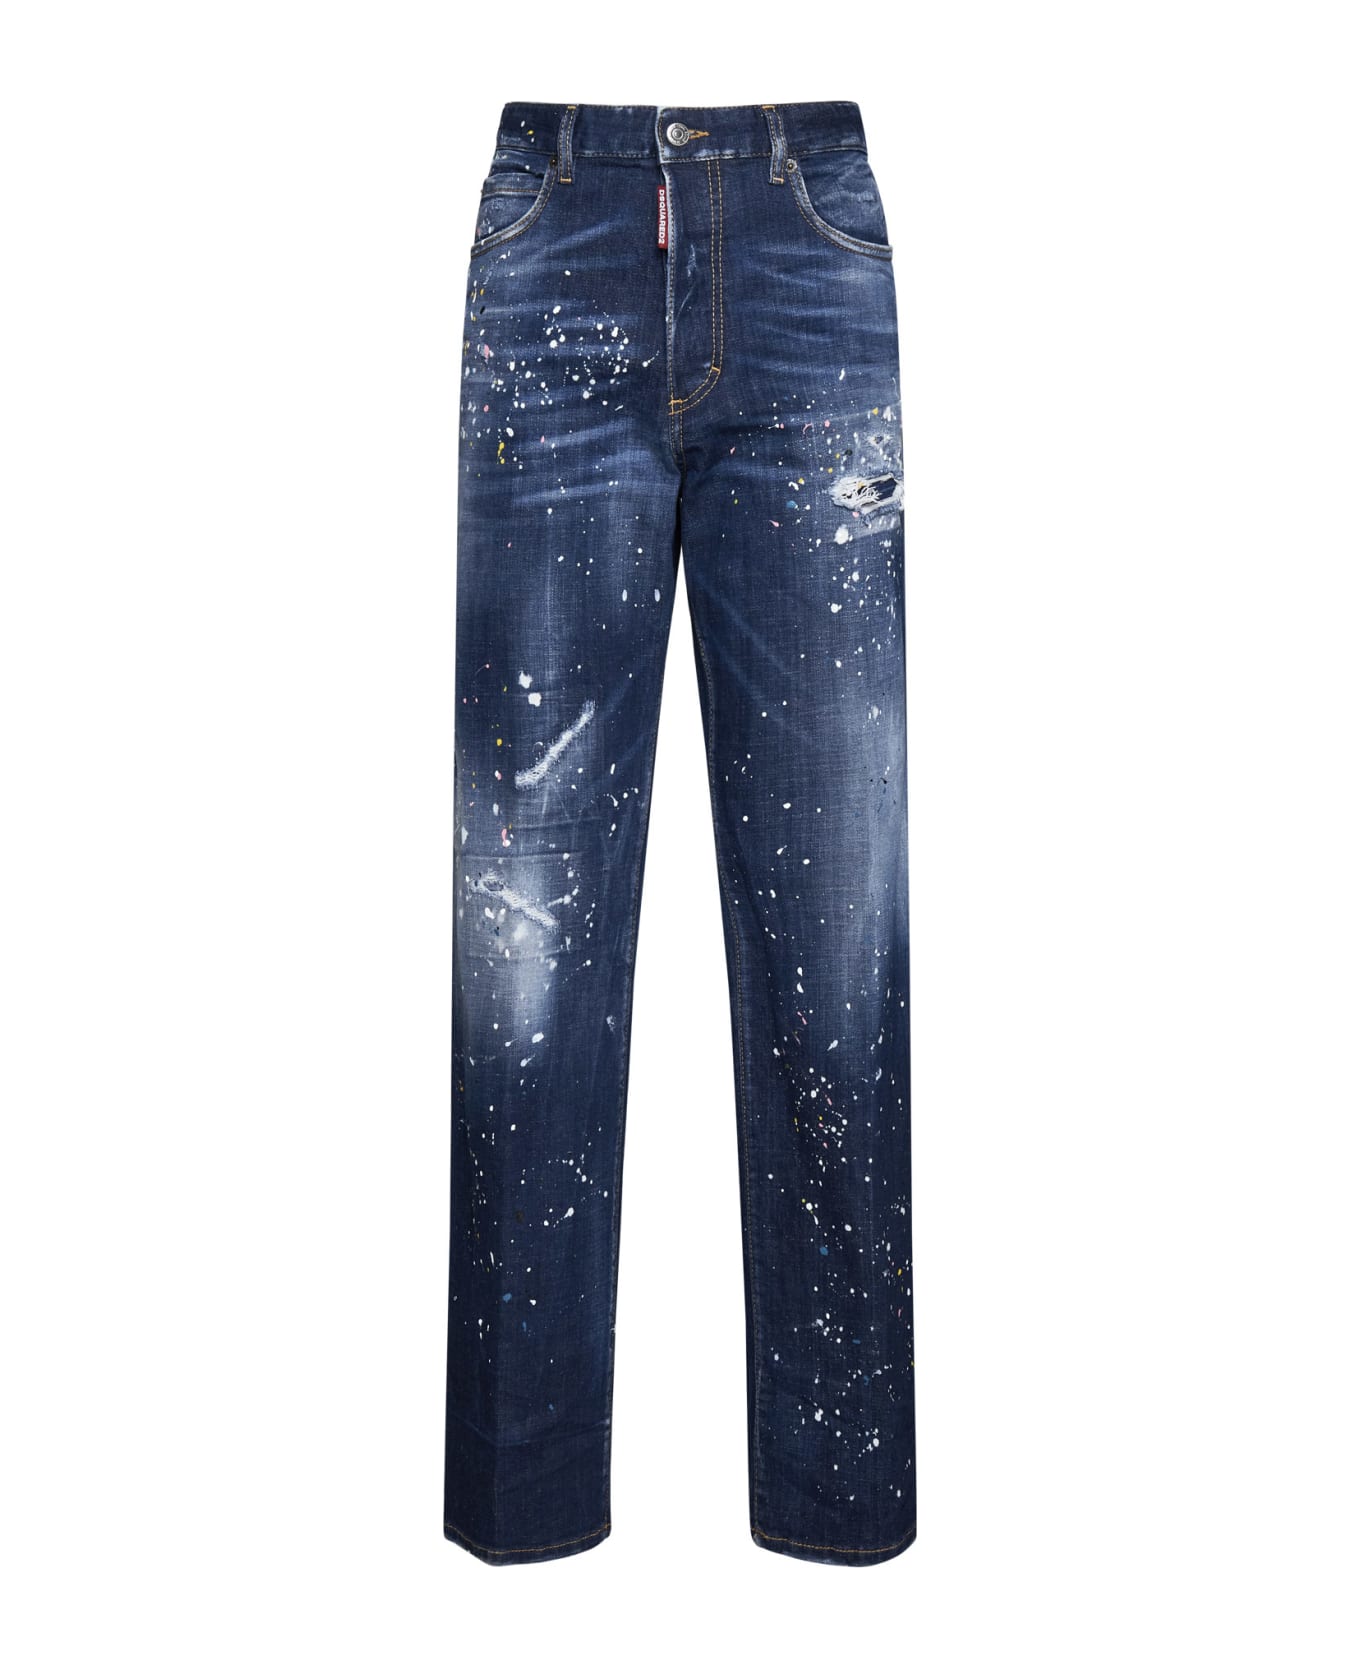 Dsquared2 San Diego Jeans - Navy blue デニム